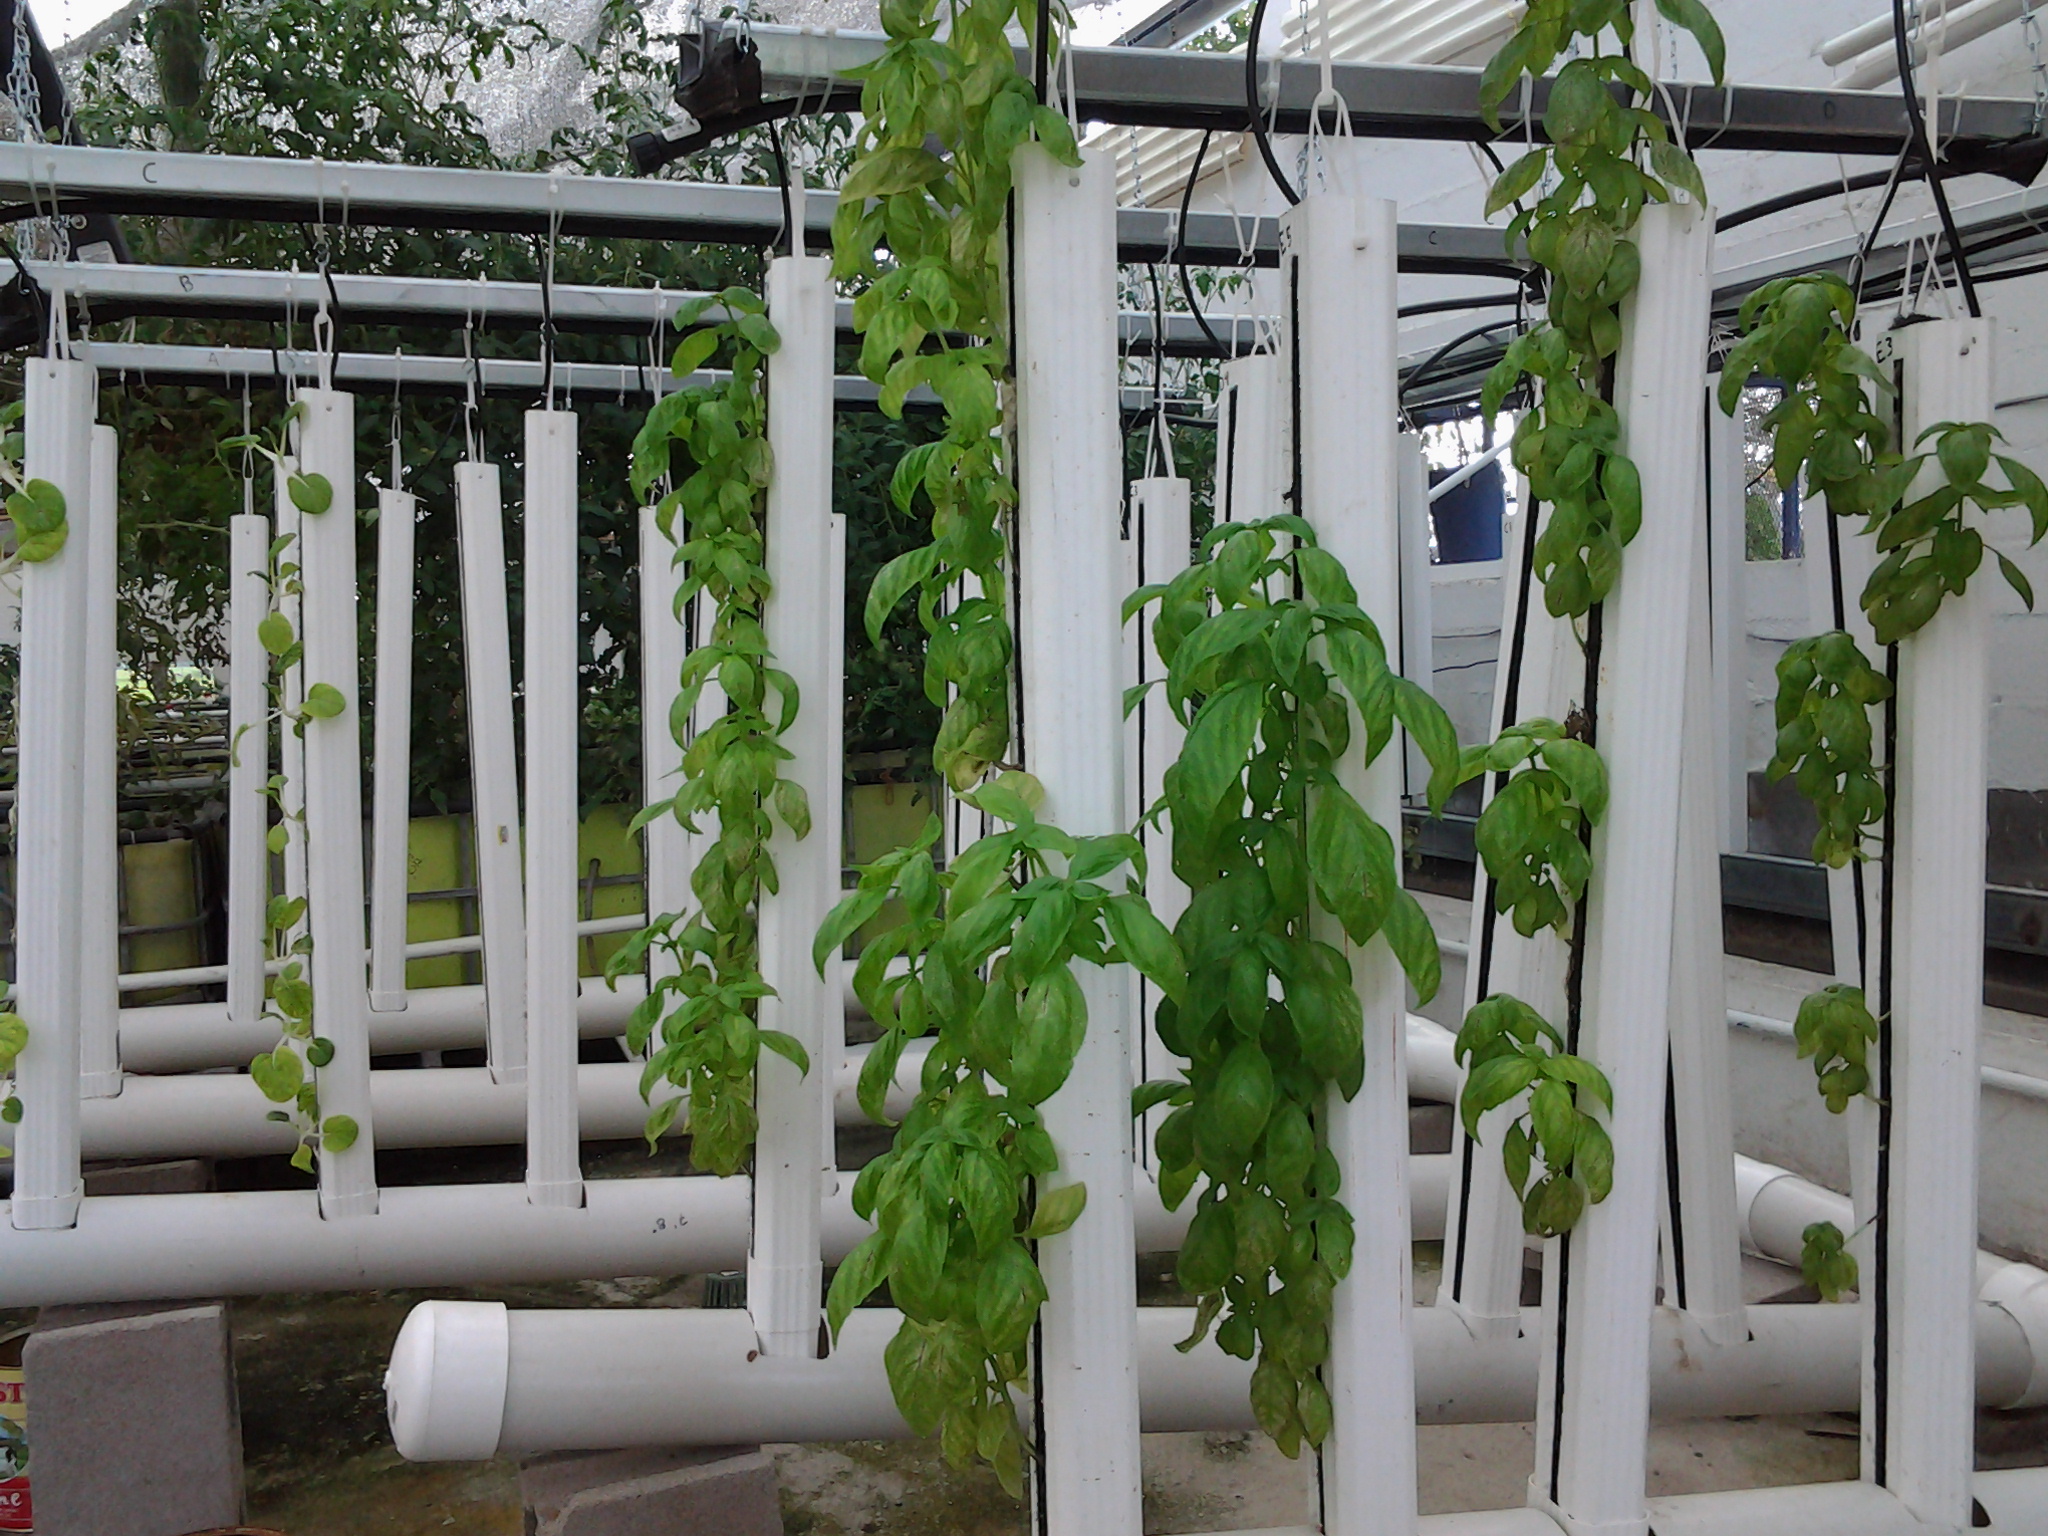 Fast Forward to mid-May 2014 : The vertical aquaponic towers that were 